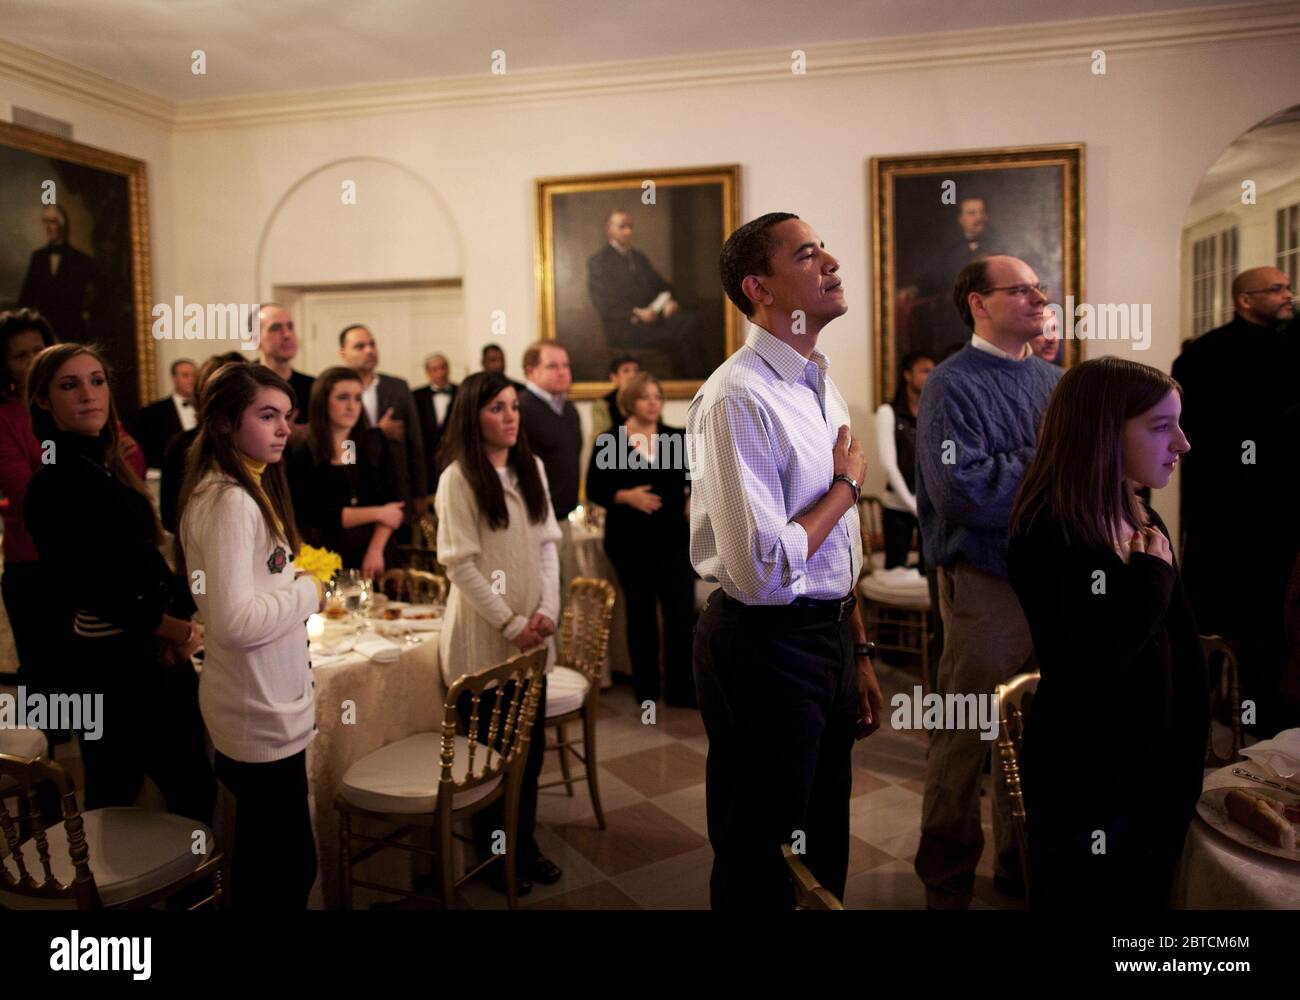 President Barack Obama with his hand on his heart as the National Anthem is played, prior to Super Bowl game kickoff, Arizona Cardinals vs. Pittsburgh Steelers in the East Garden Room of the White House 2/1/09. Stock Photo